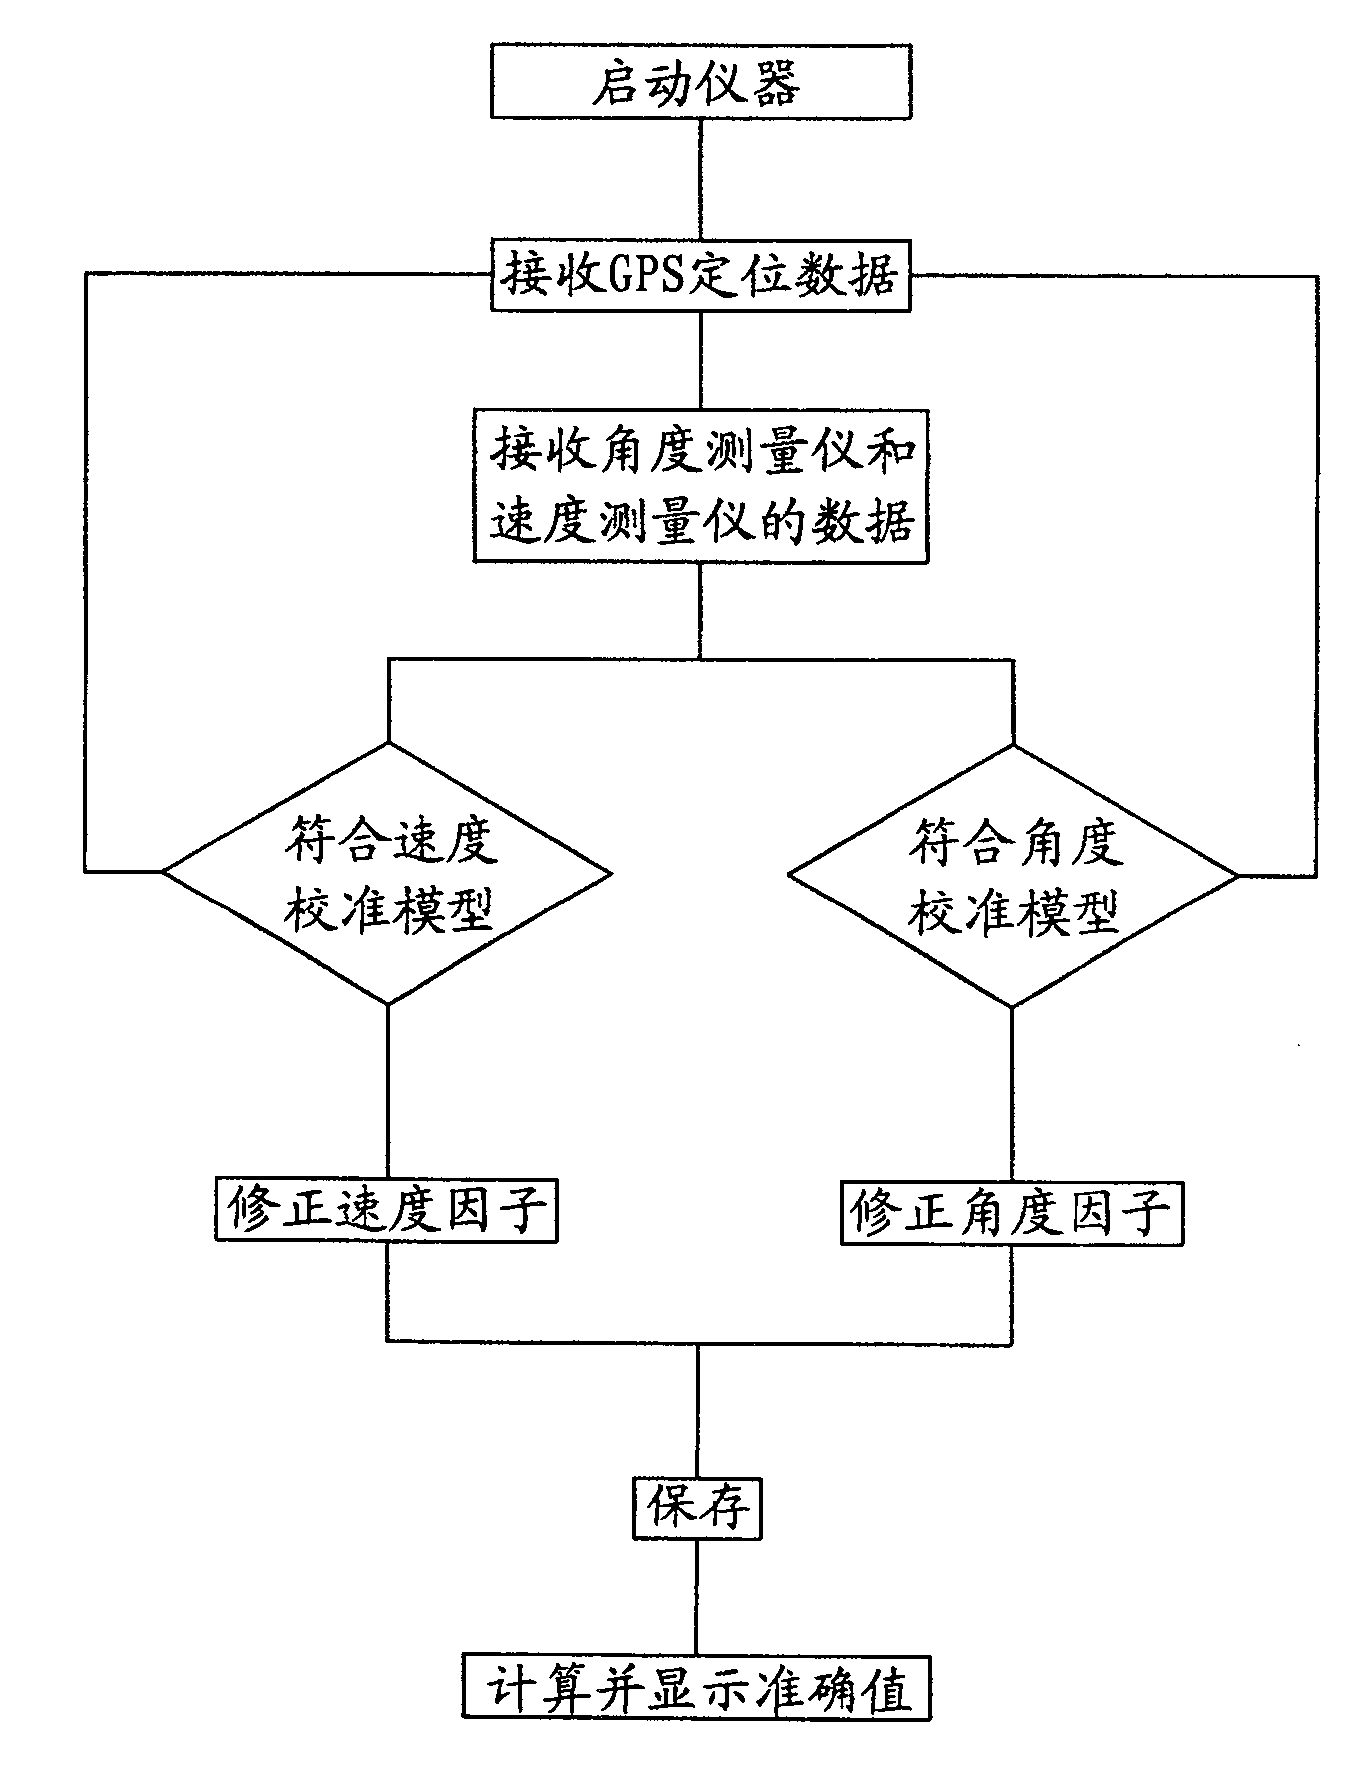 Calibration method for vehicle speed measuring instrument